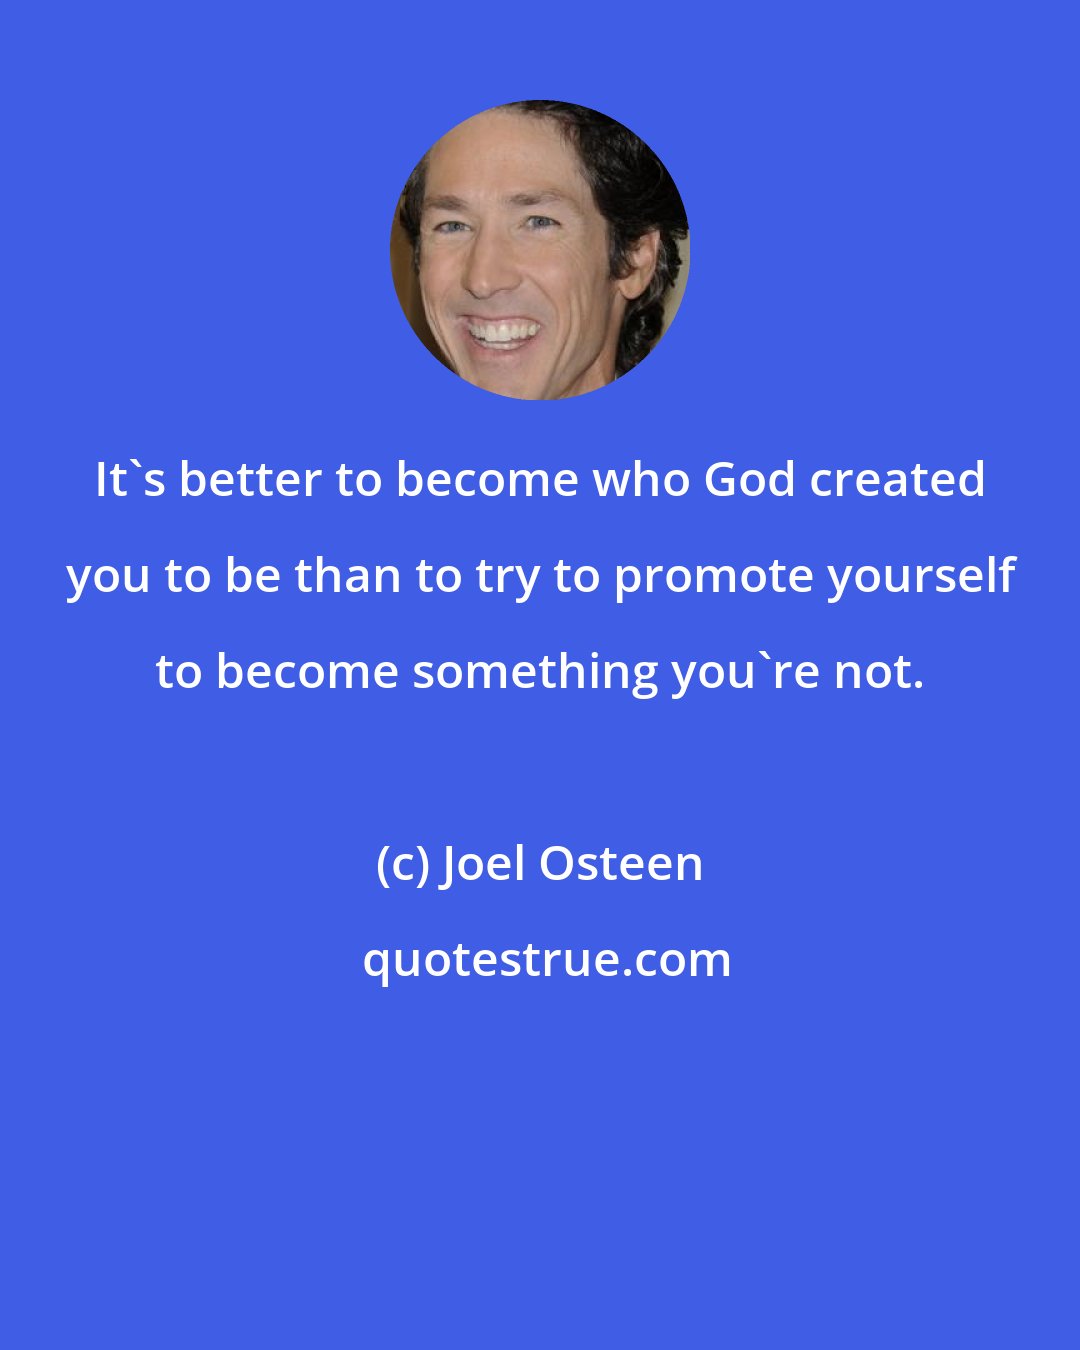 Joel Osteen: It's better to become who God created you to be than to try to promote yourself to become something you're not.